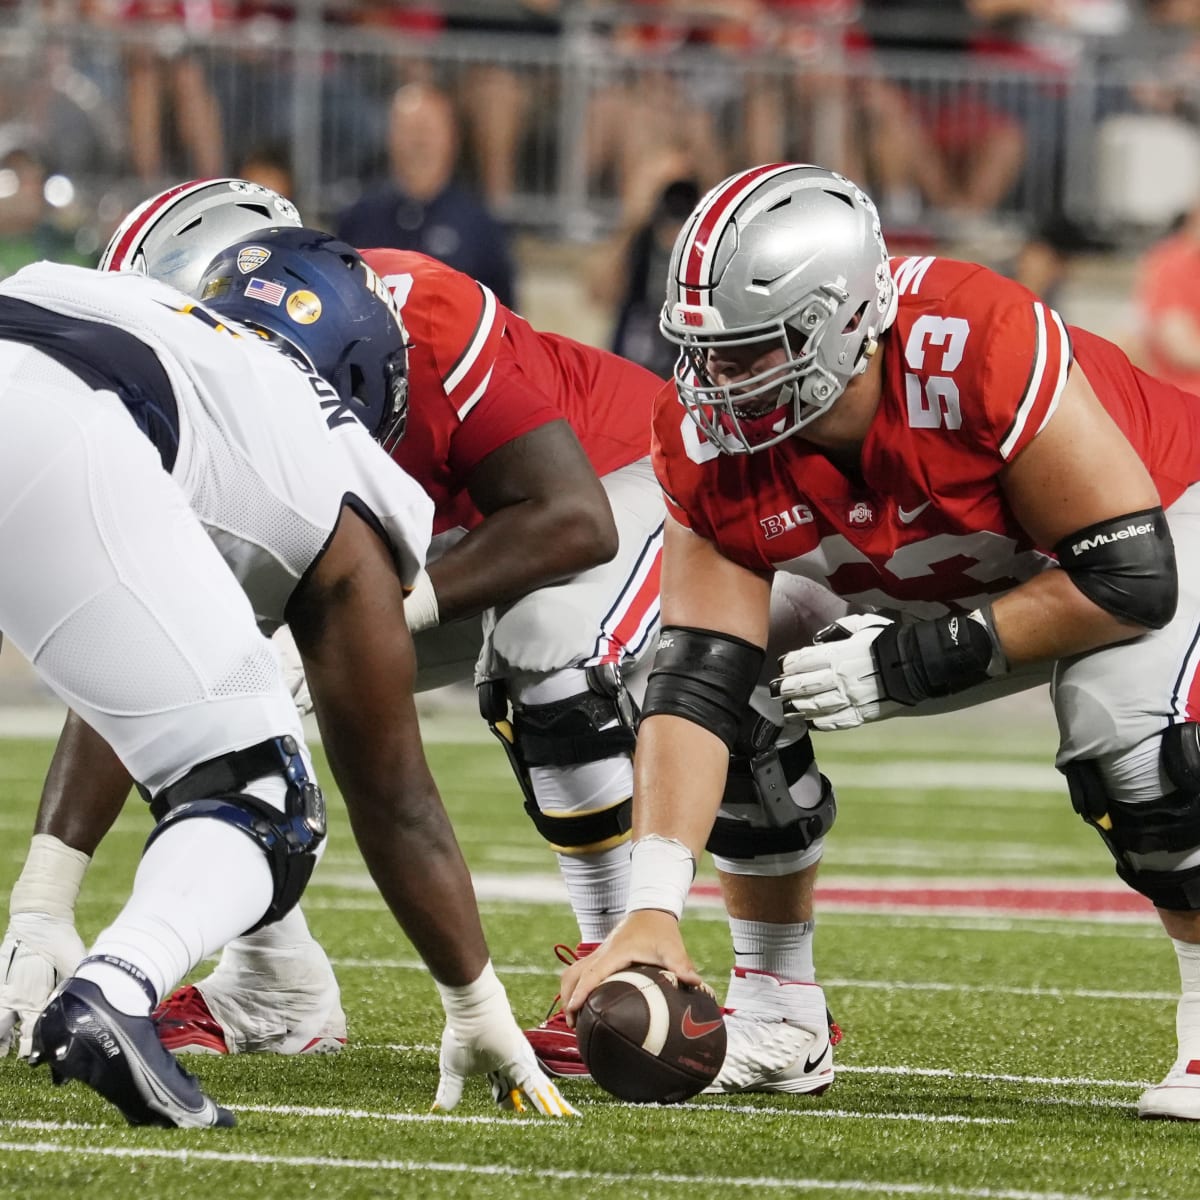 Ohio State center Luke Wypler selected by the Browns in the NFL draft